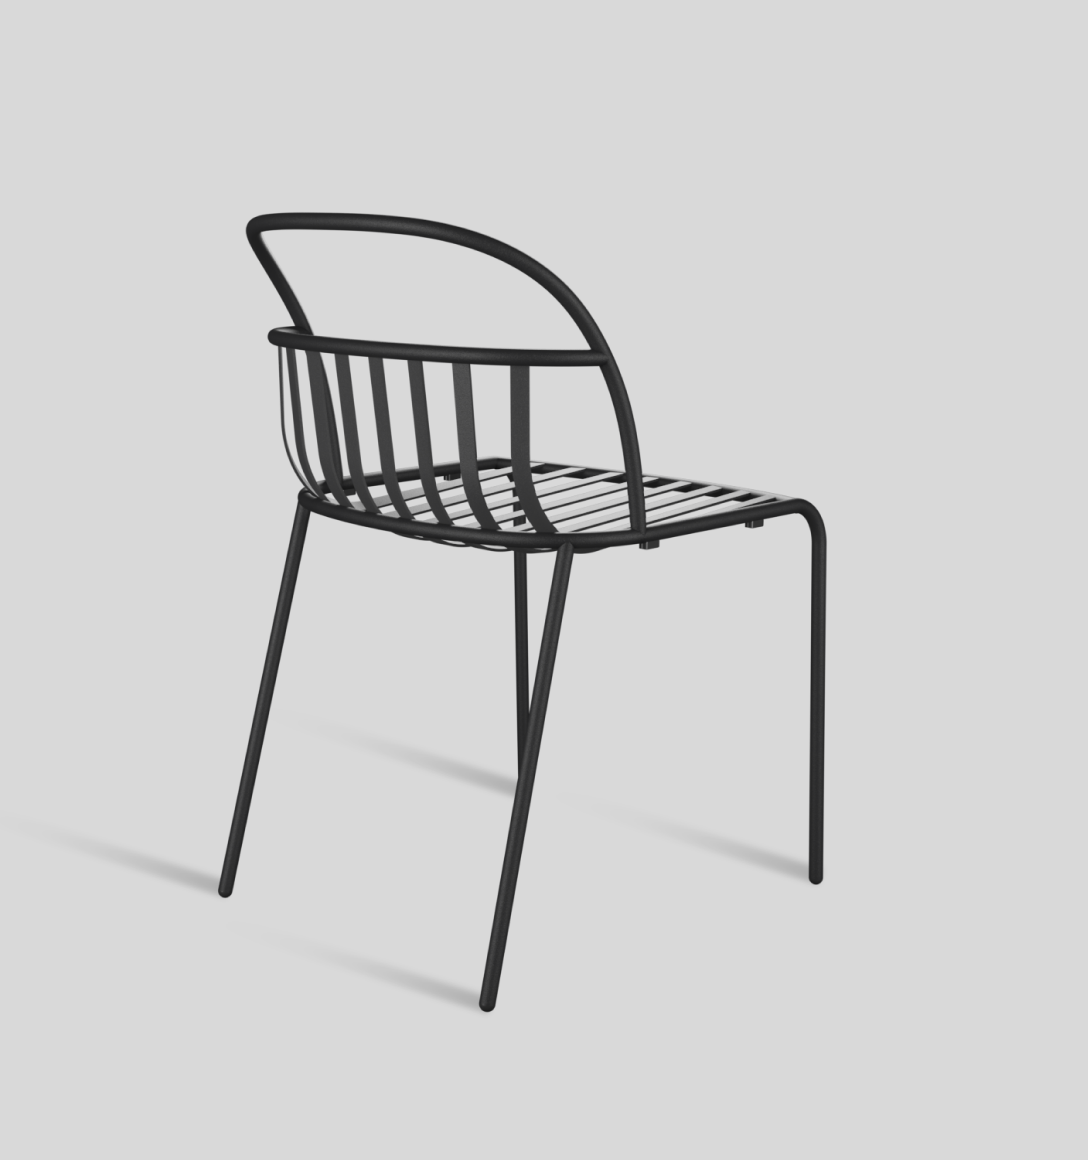 Nova Chair without arm